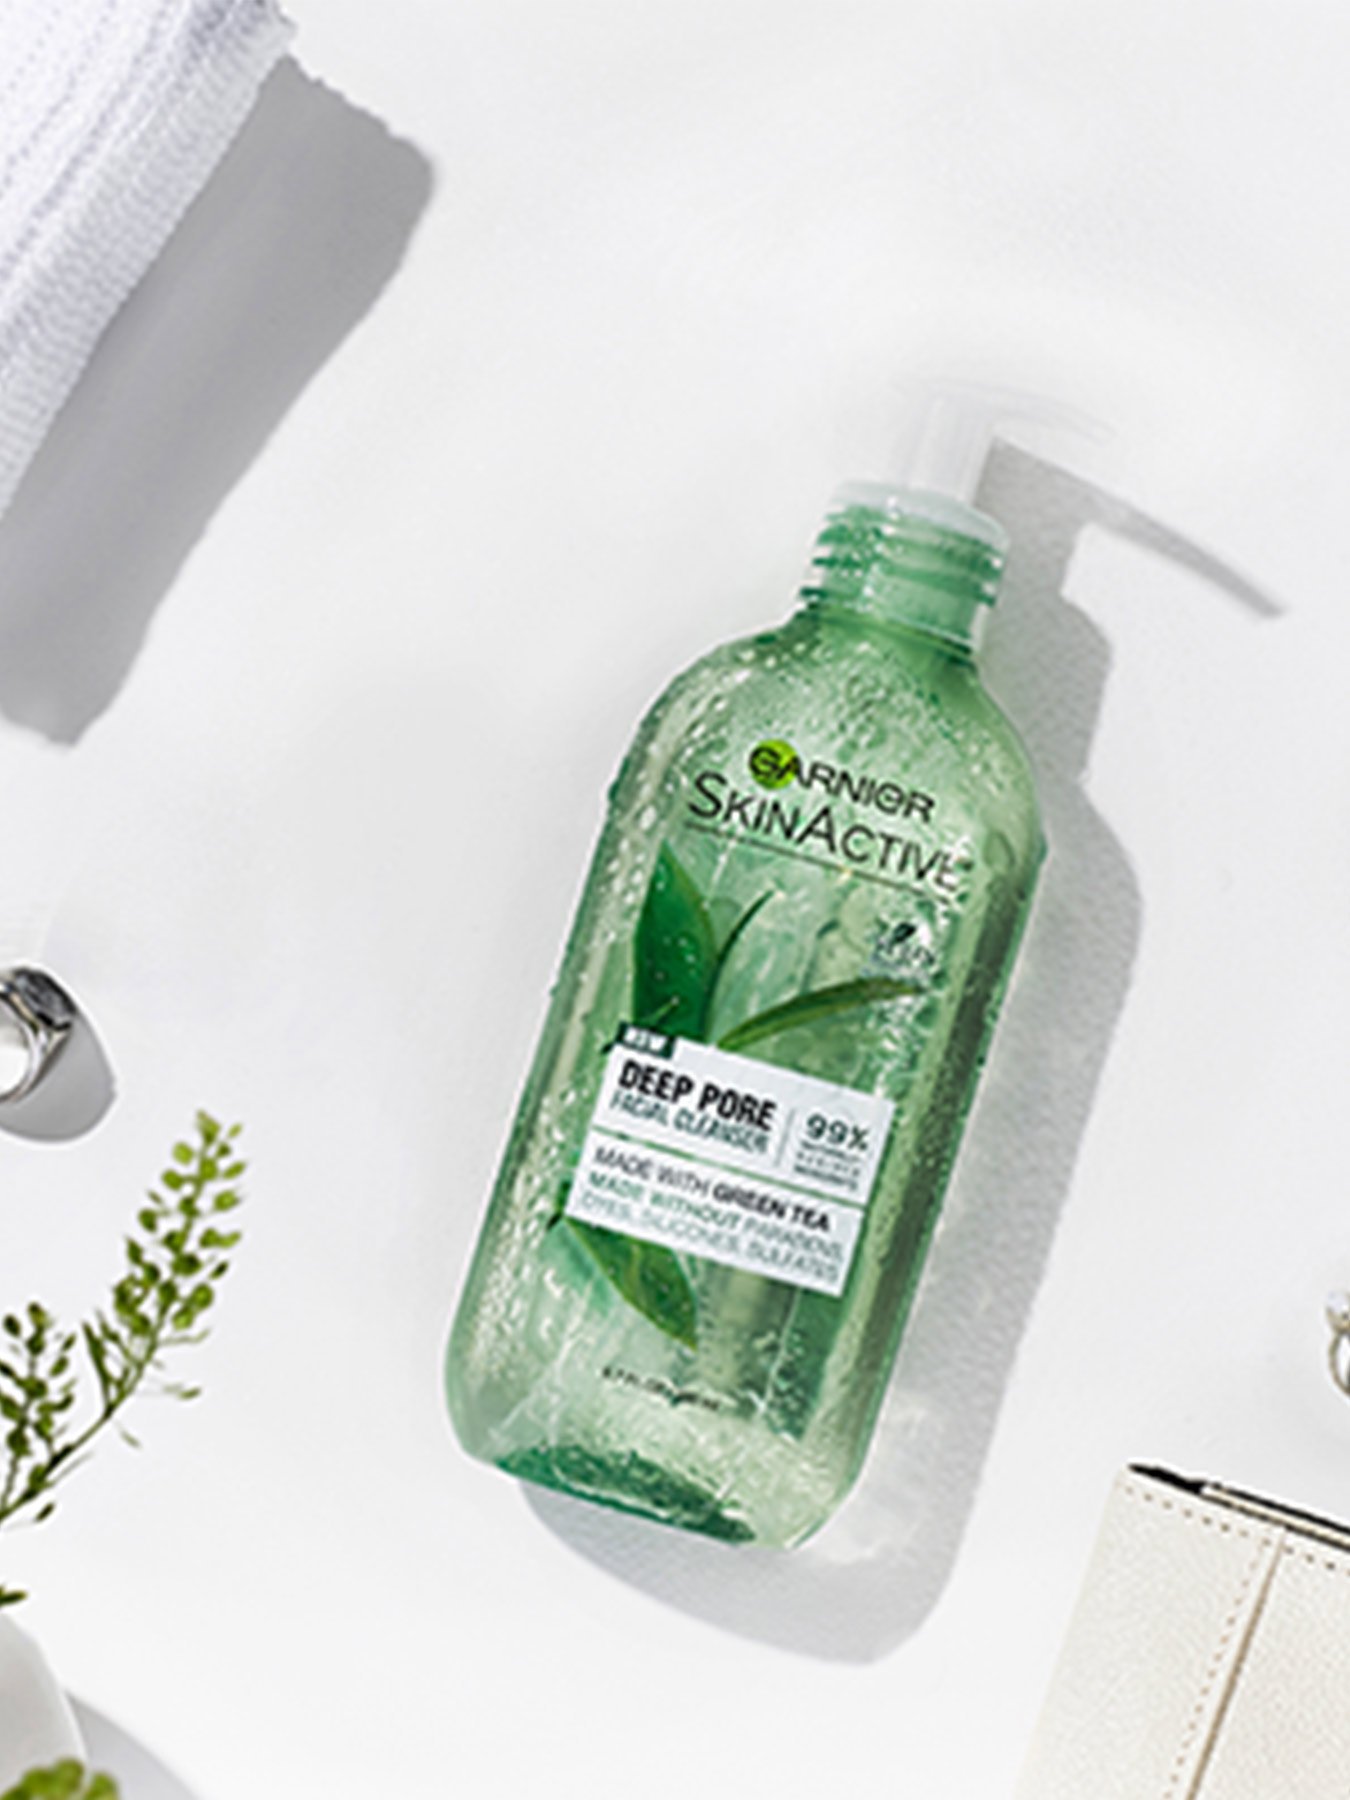 Garnier SkinActive Deep Pore Face Wash with Green Tea on a white surface with a white loofah, white wallet, two silver rings, a white wallet, and a small potted plant.